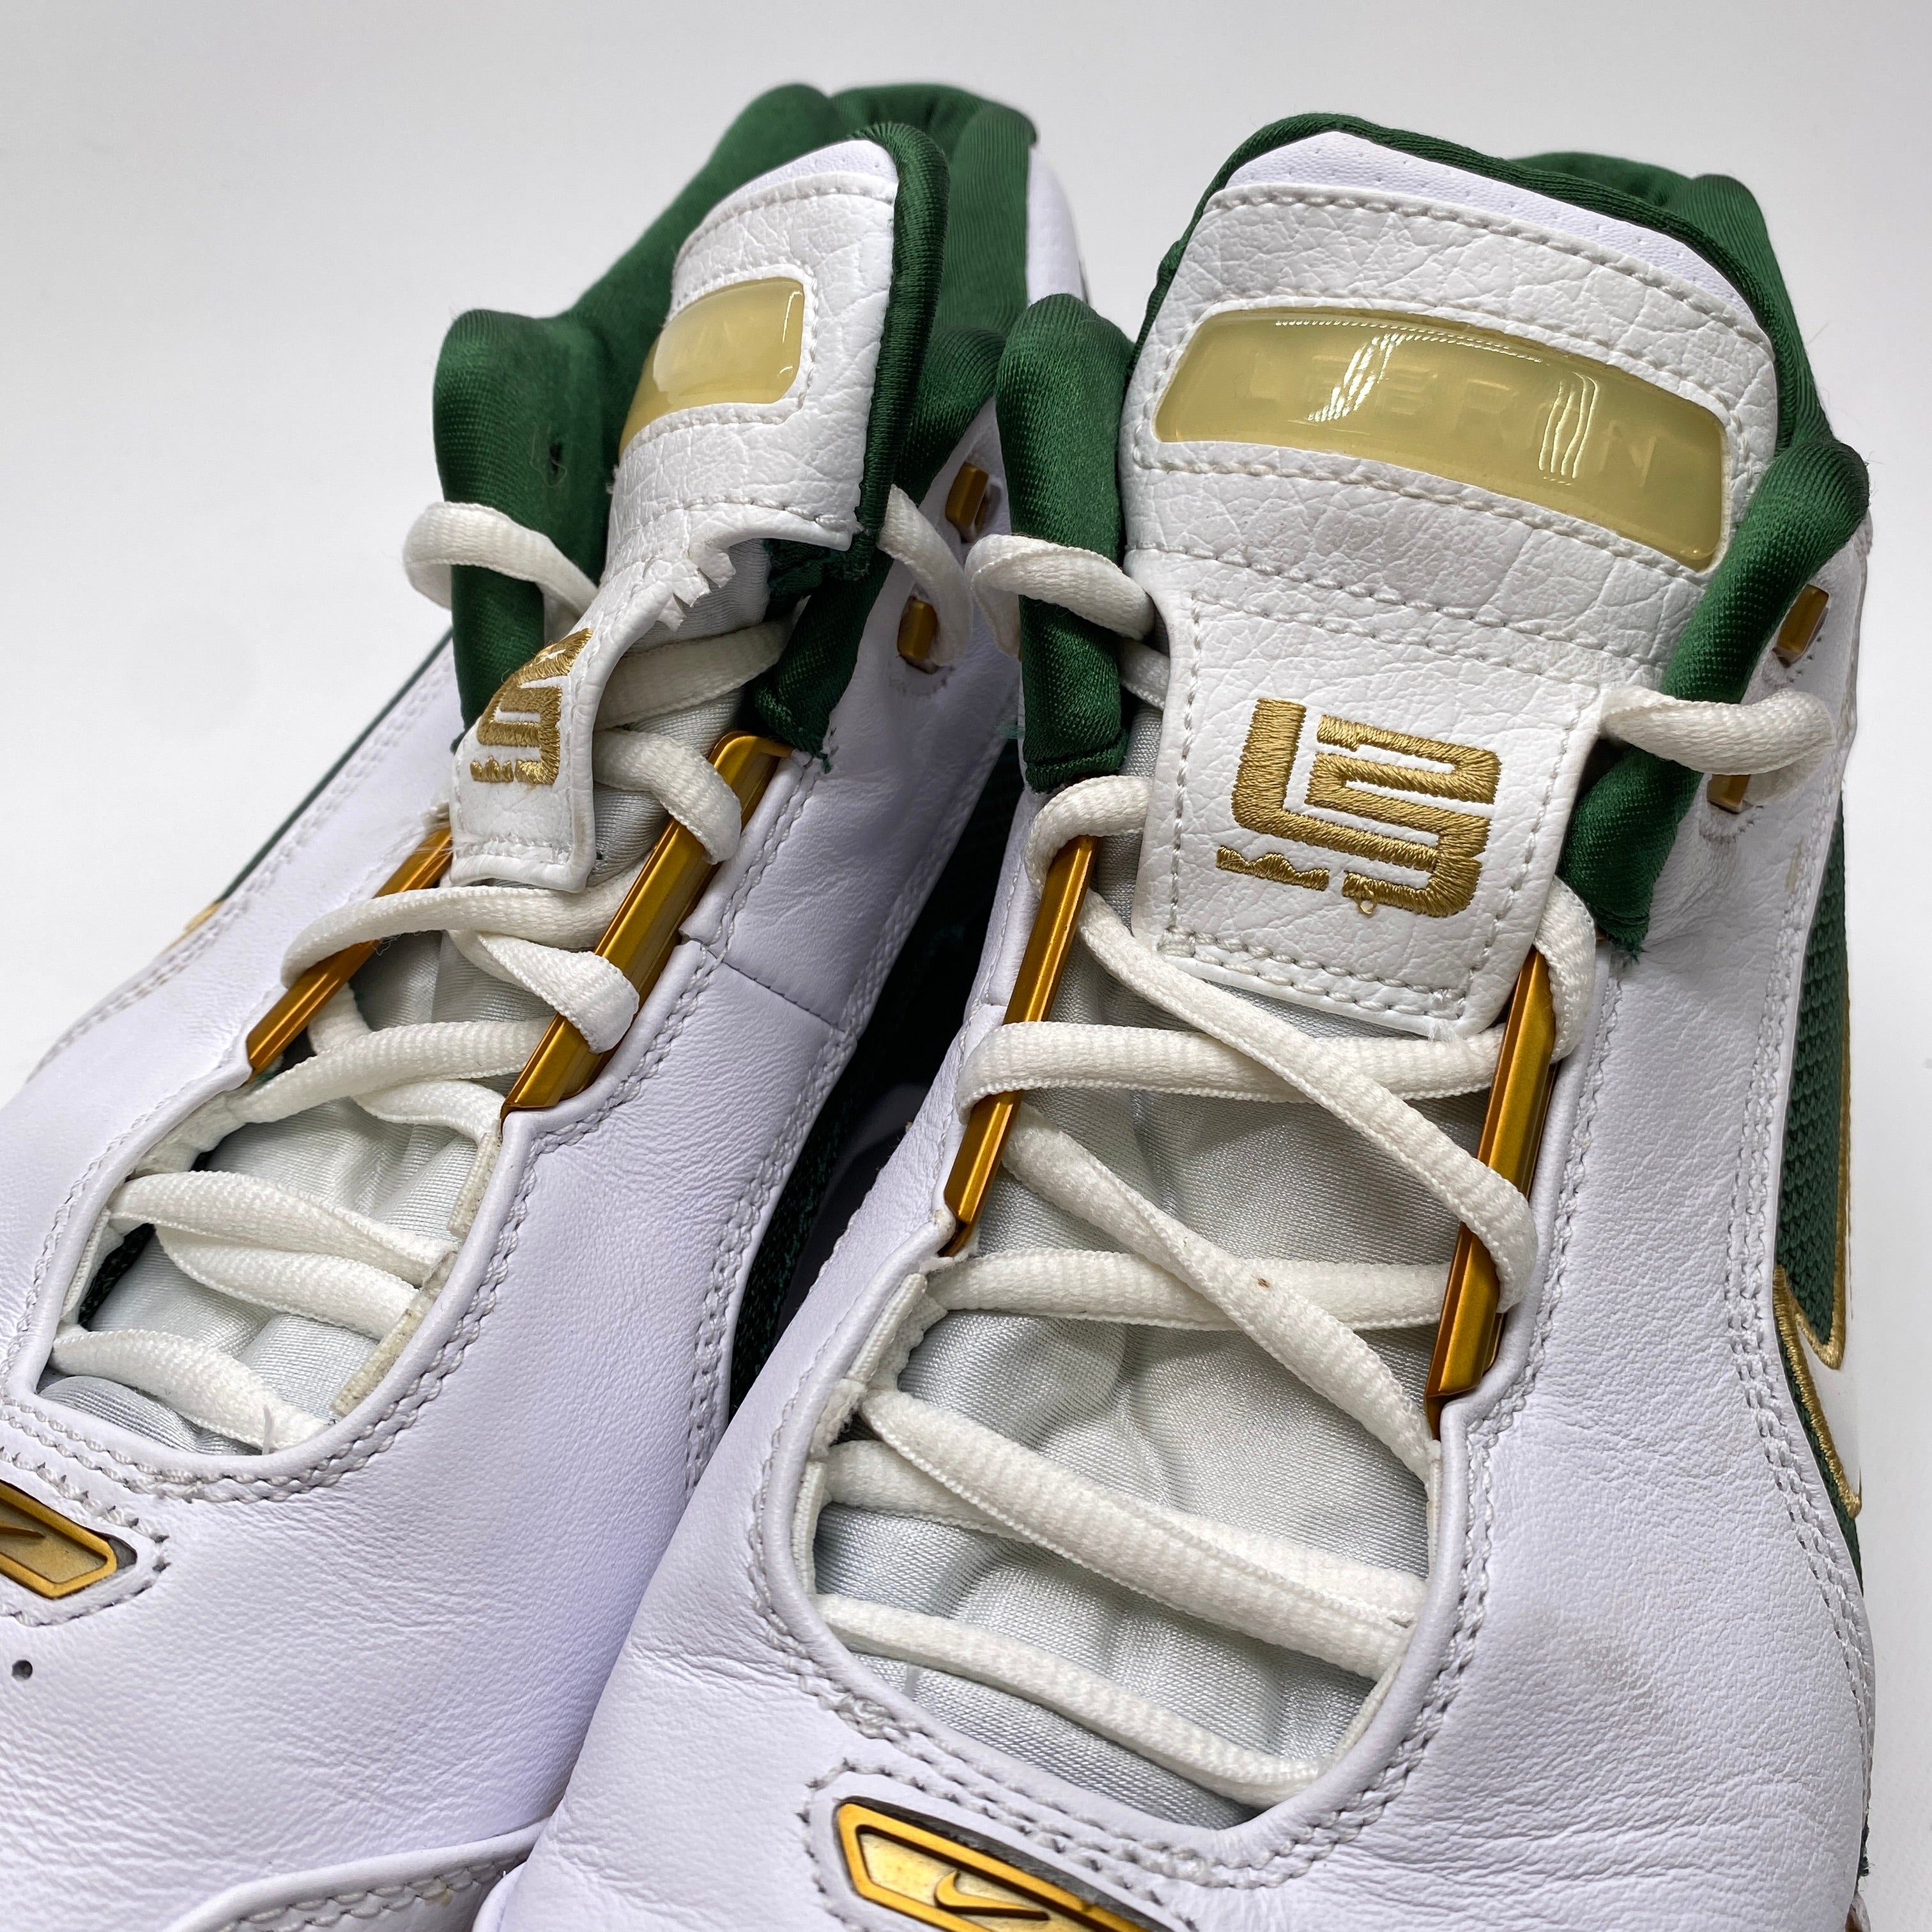 Nike Air Zoom Generation &quot;Svsm&quot; 2018 Used Size 9